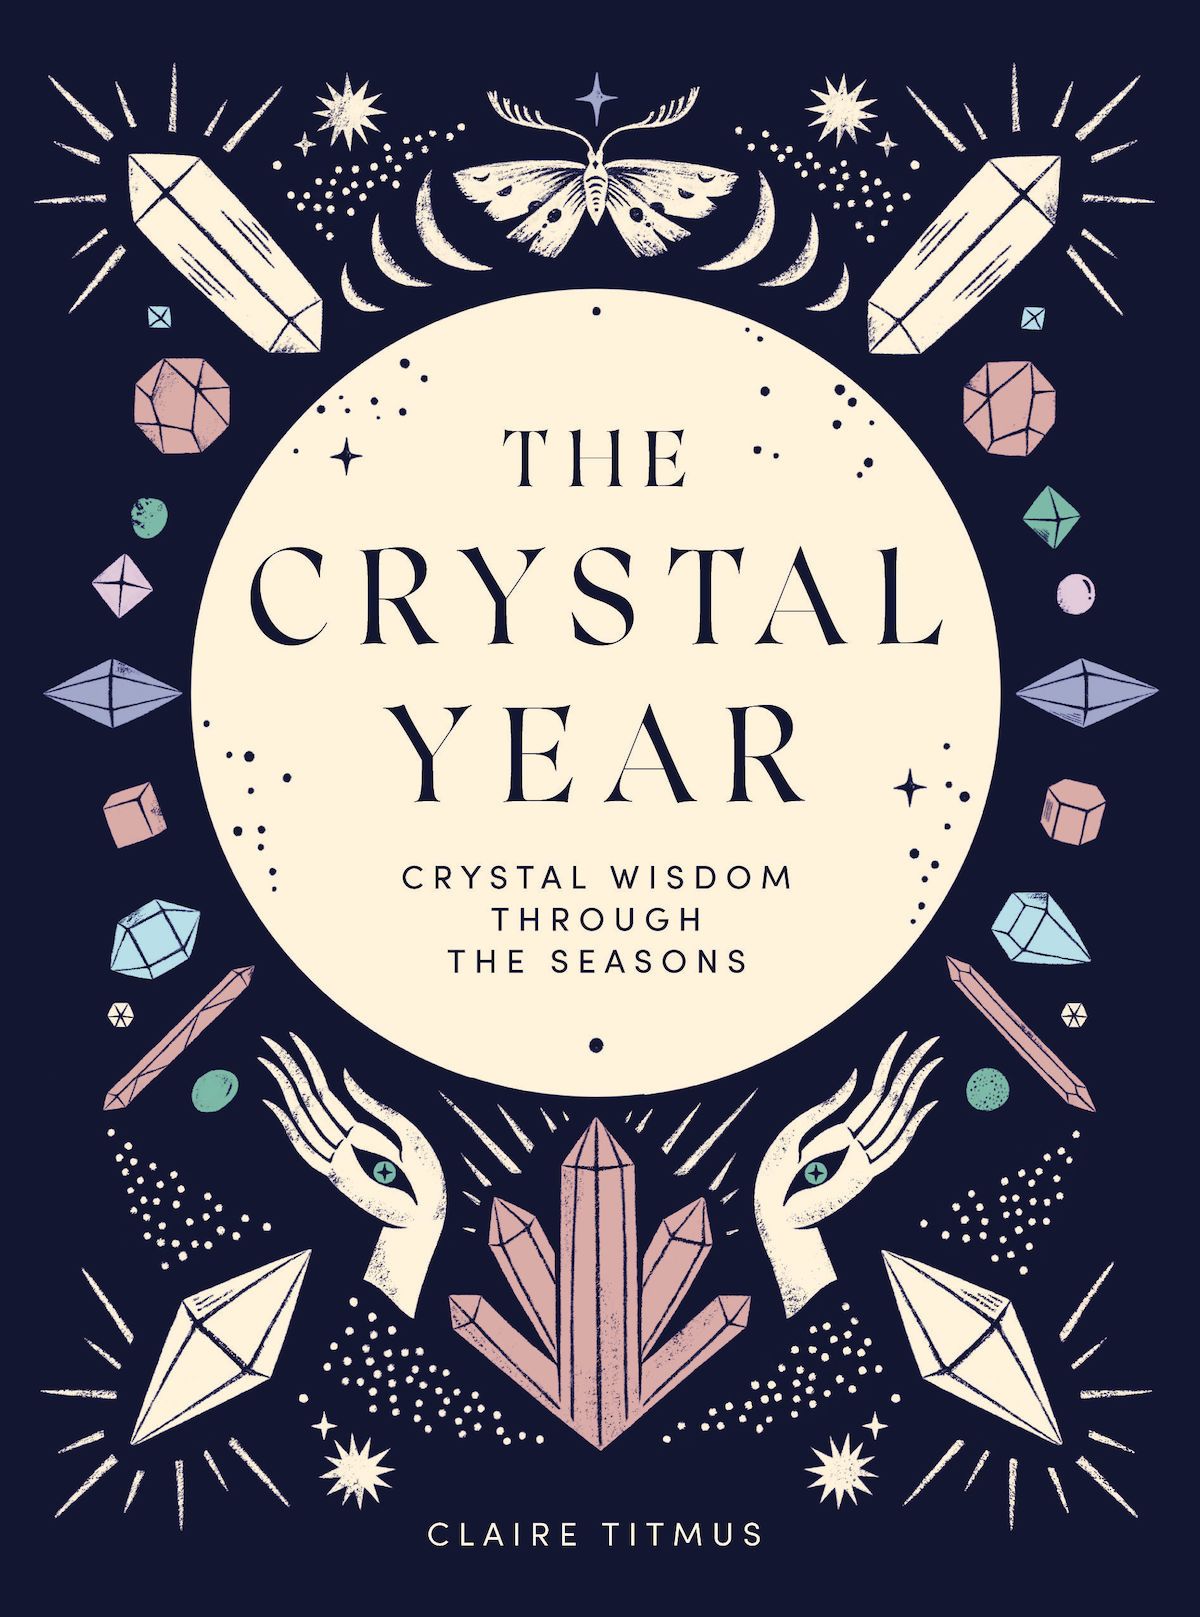 Book cover: Crystal year - Crystal wisdom through the seasons by Claire Titmus. A glowing moon is surrounded by crystal illustrations, hands and stars.